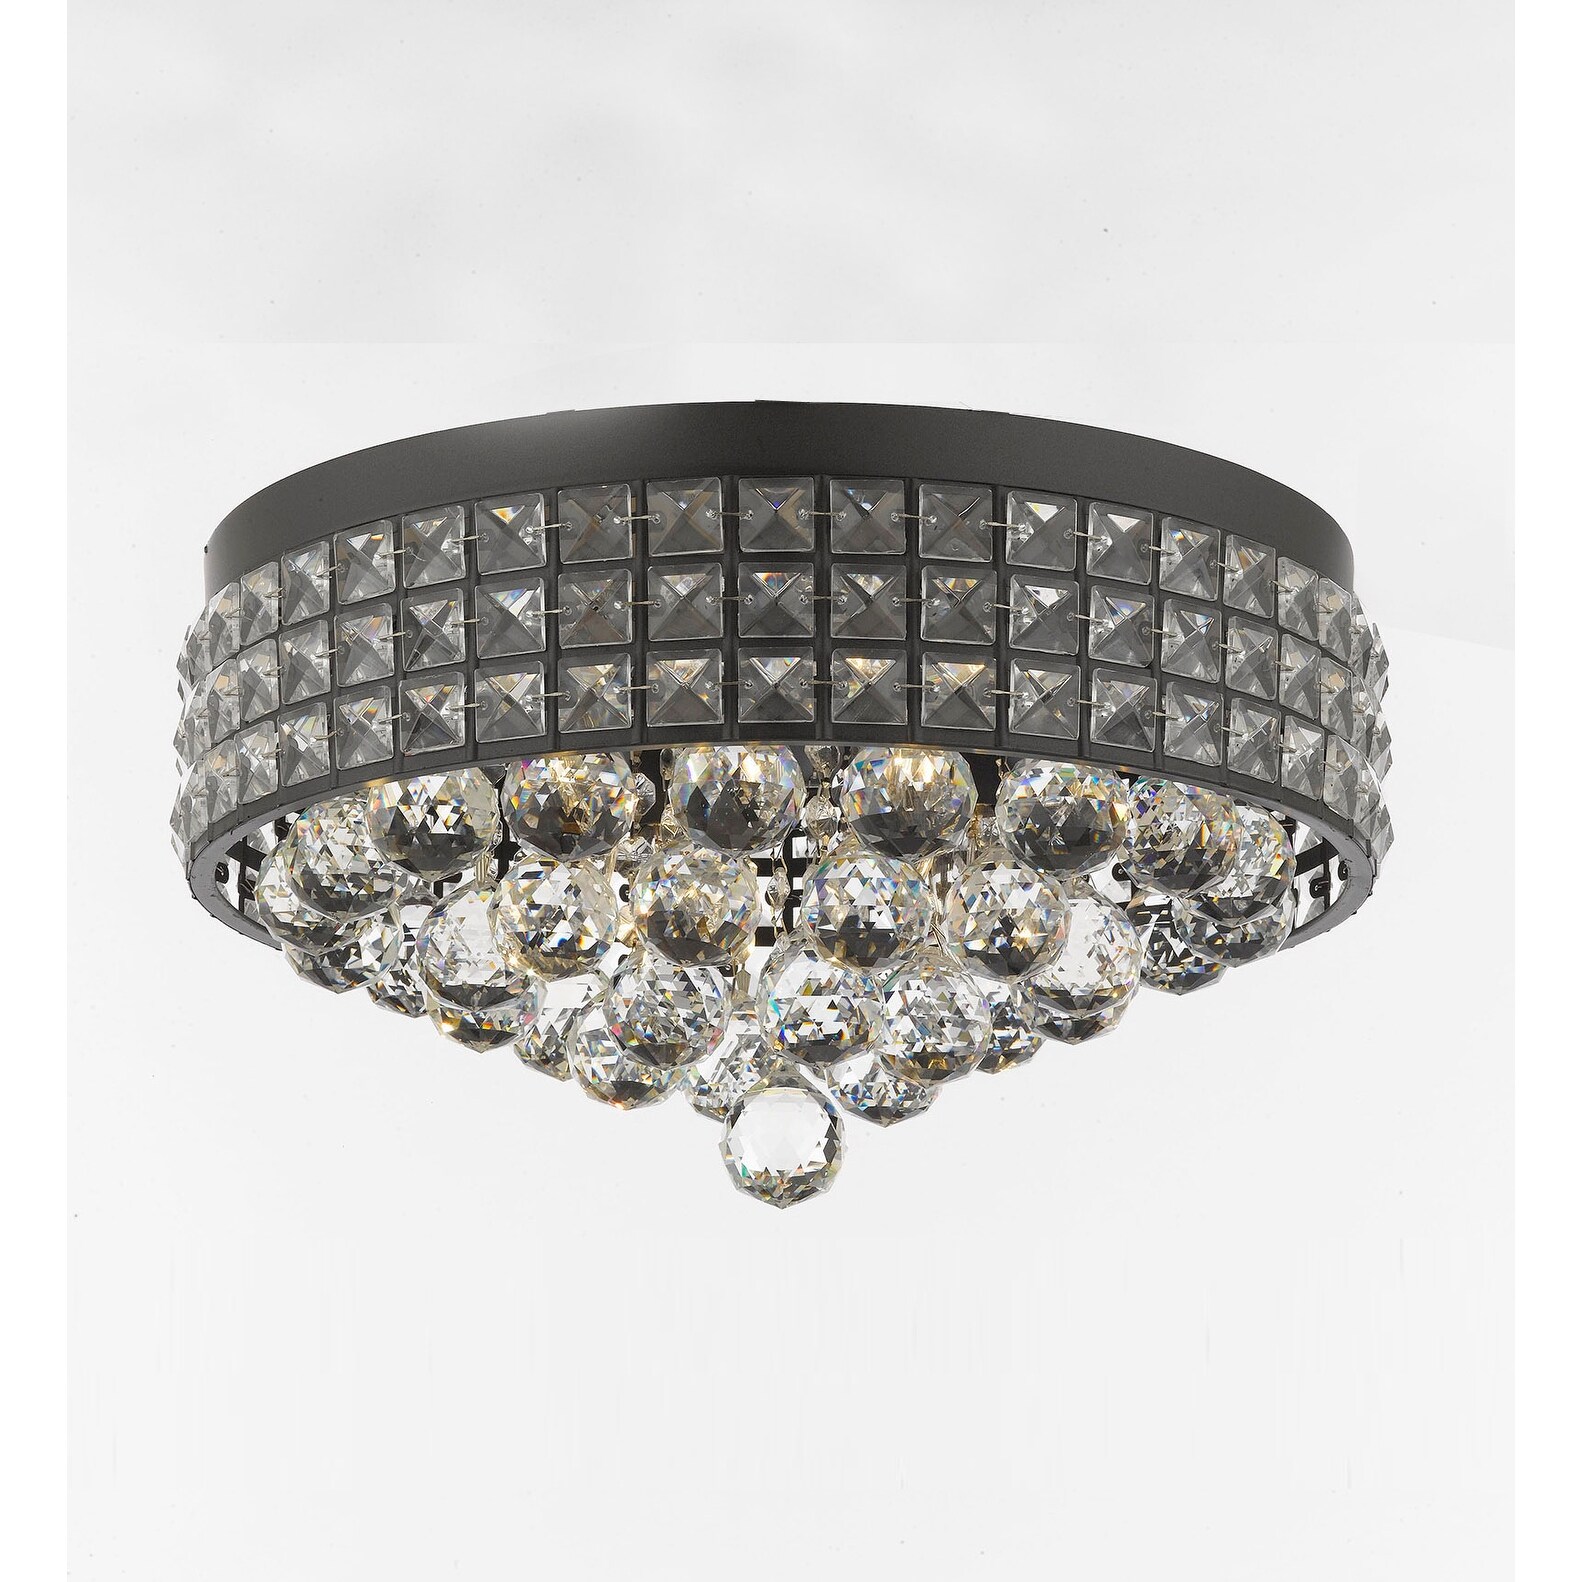 Crystal Balls Semi-Flush Mount French Empire Crystal Chandelier With 40 mm 